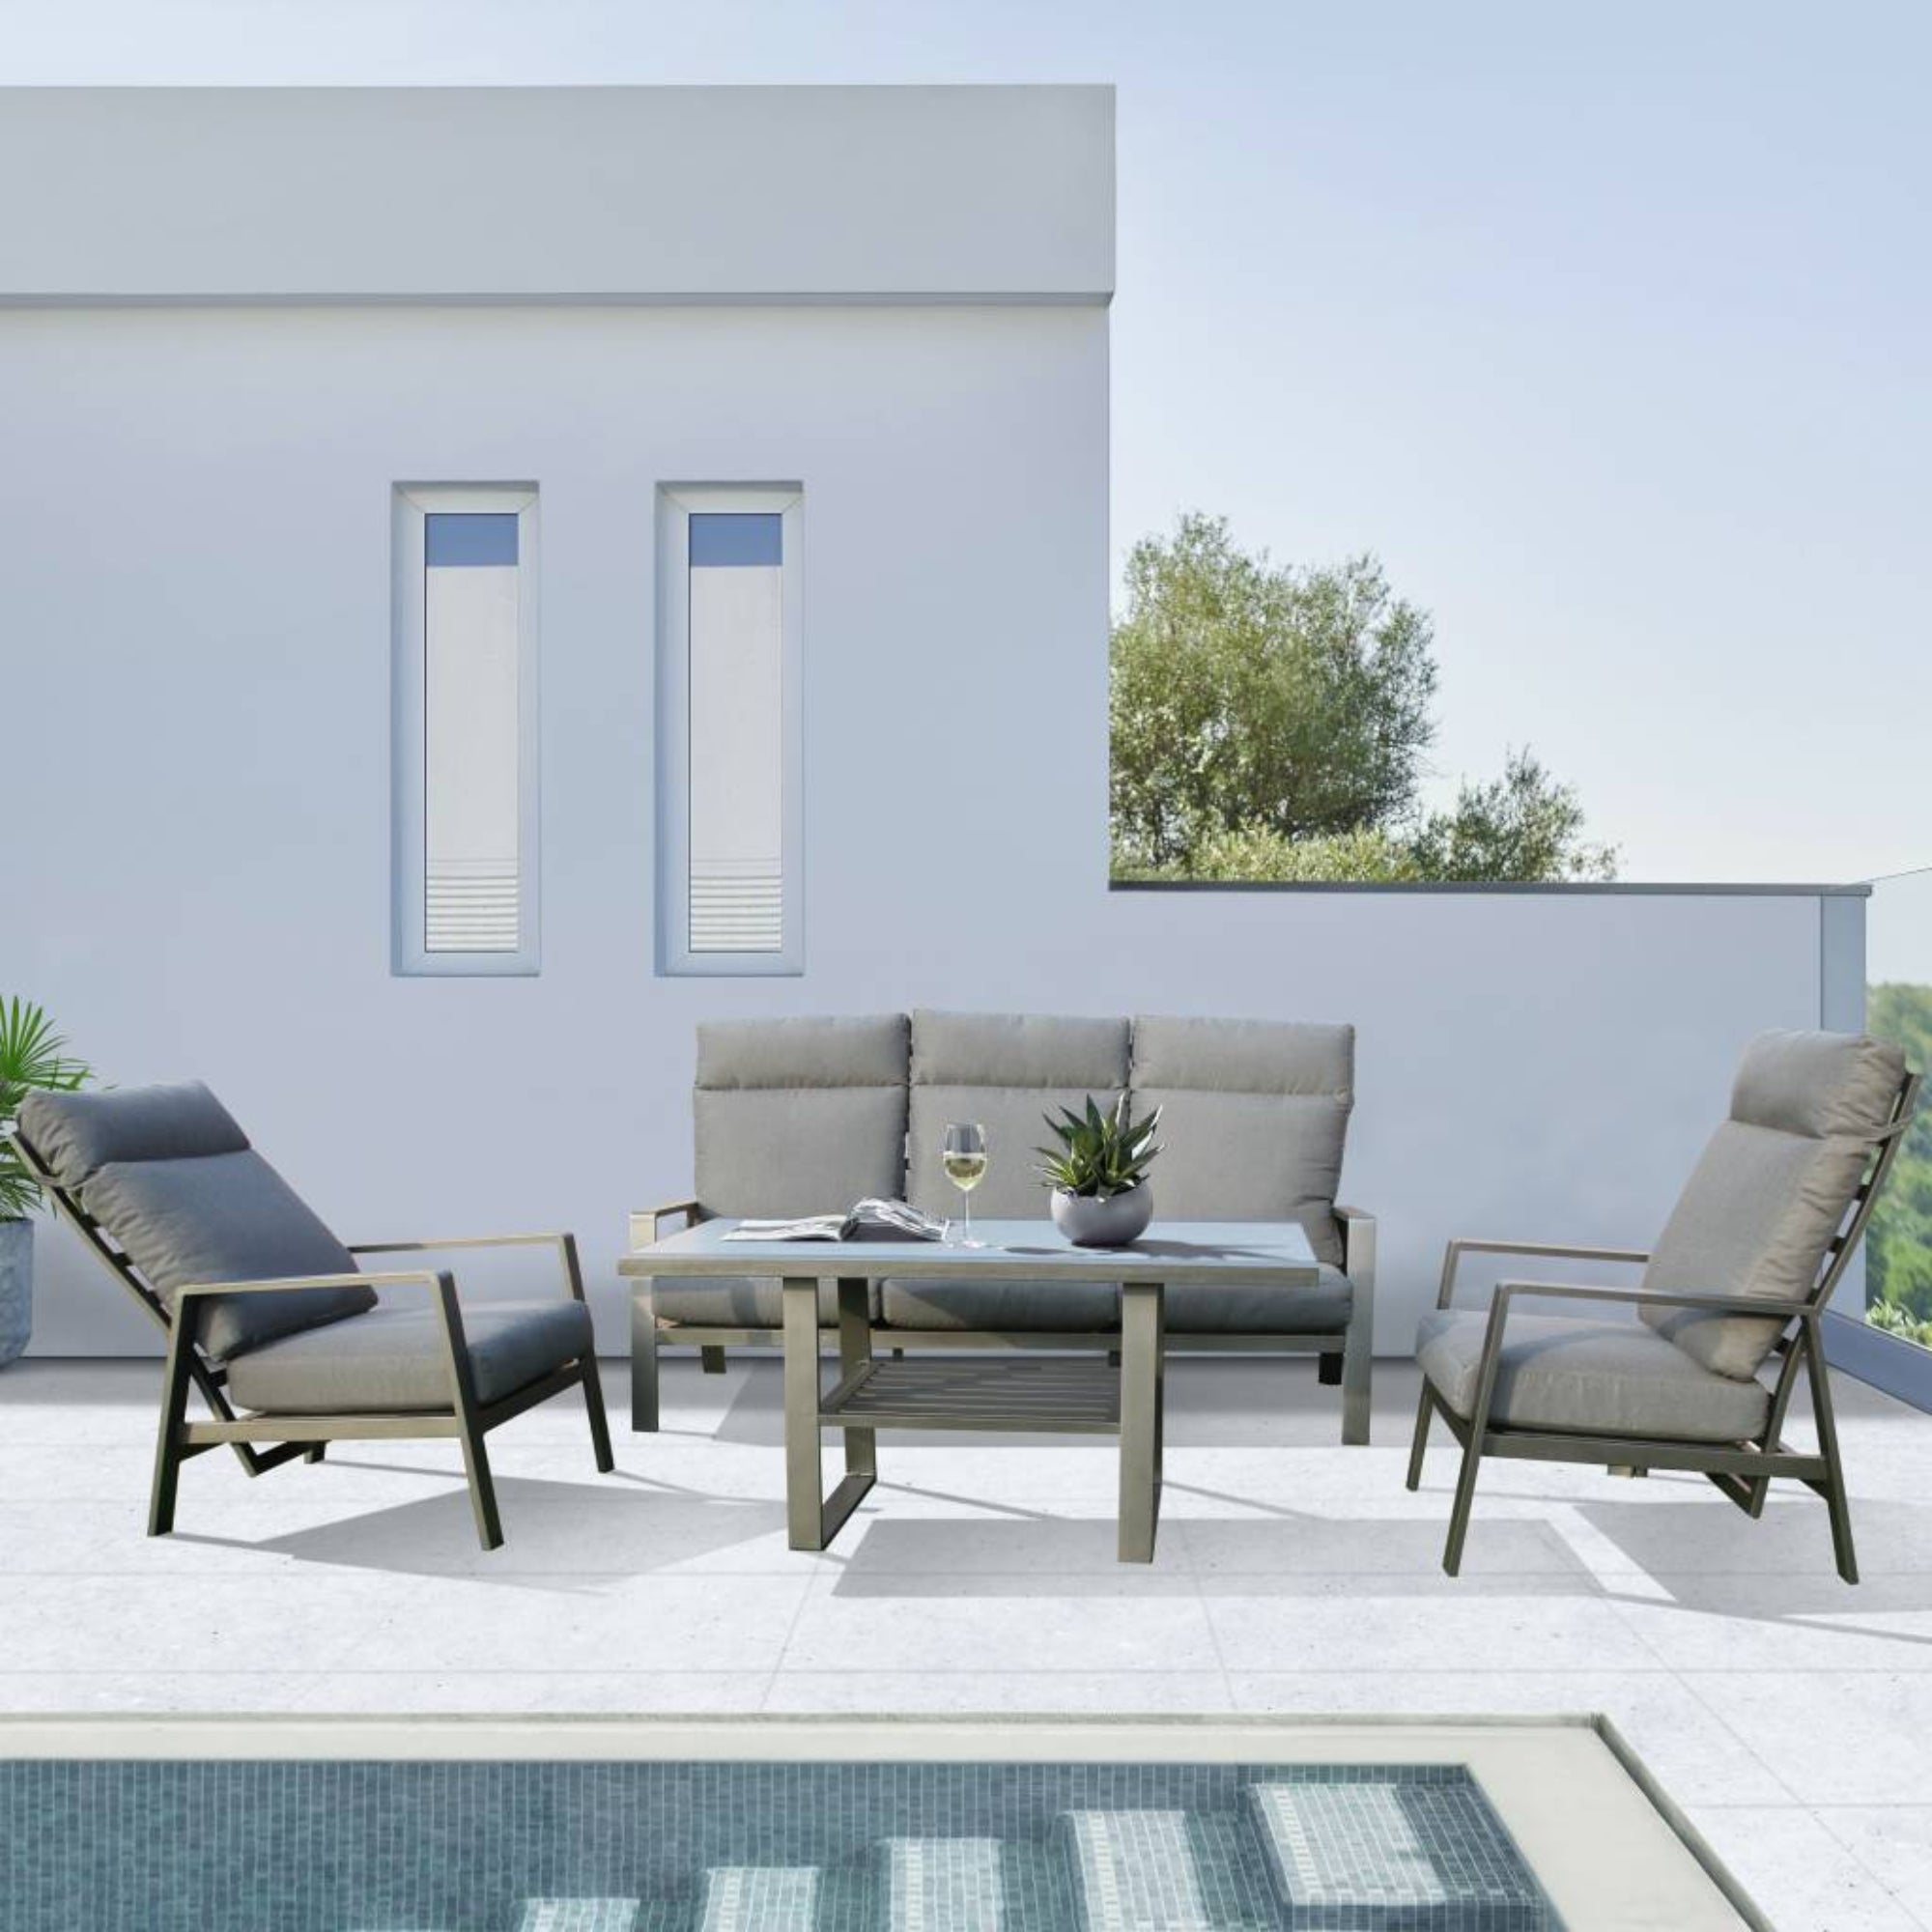 Outdoor 5-Seater Sofa Dining Set, Adjustable Armchairs, Pearl